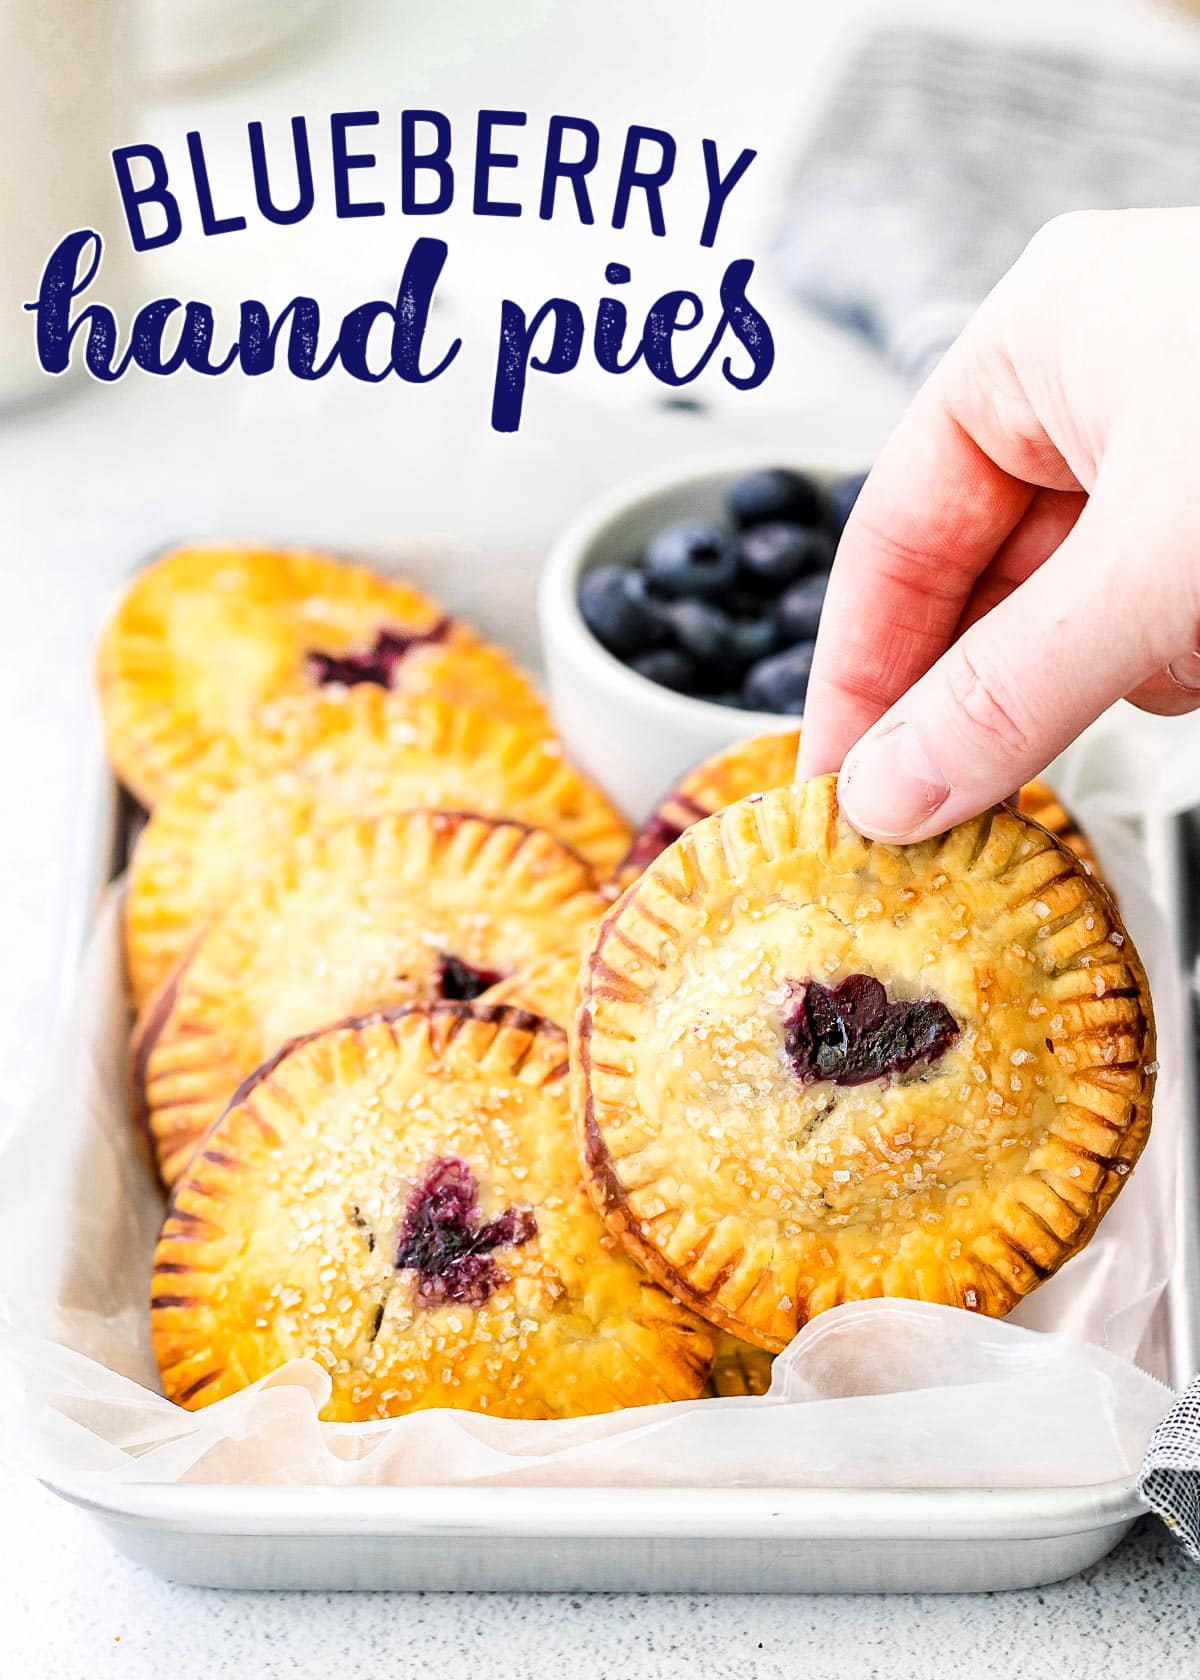 six blueberry hand pies on a quarter sheet tray with a small bowl of blueberries. One pie is being held up with a hand. Title overlay at top of image.